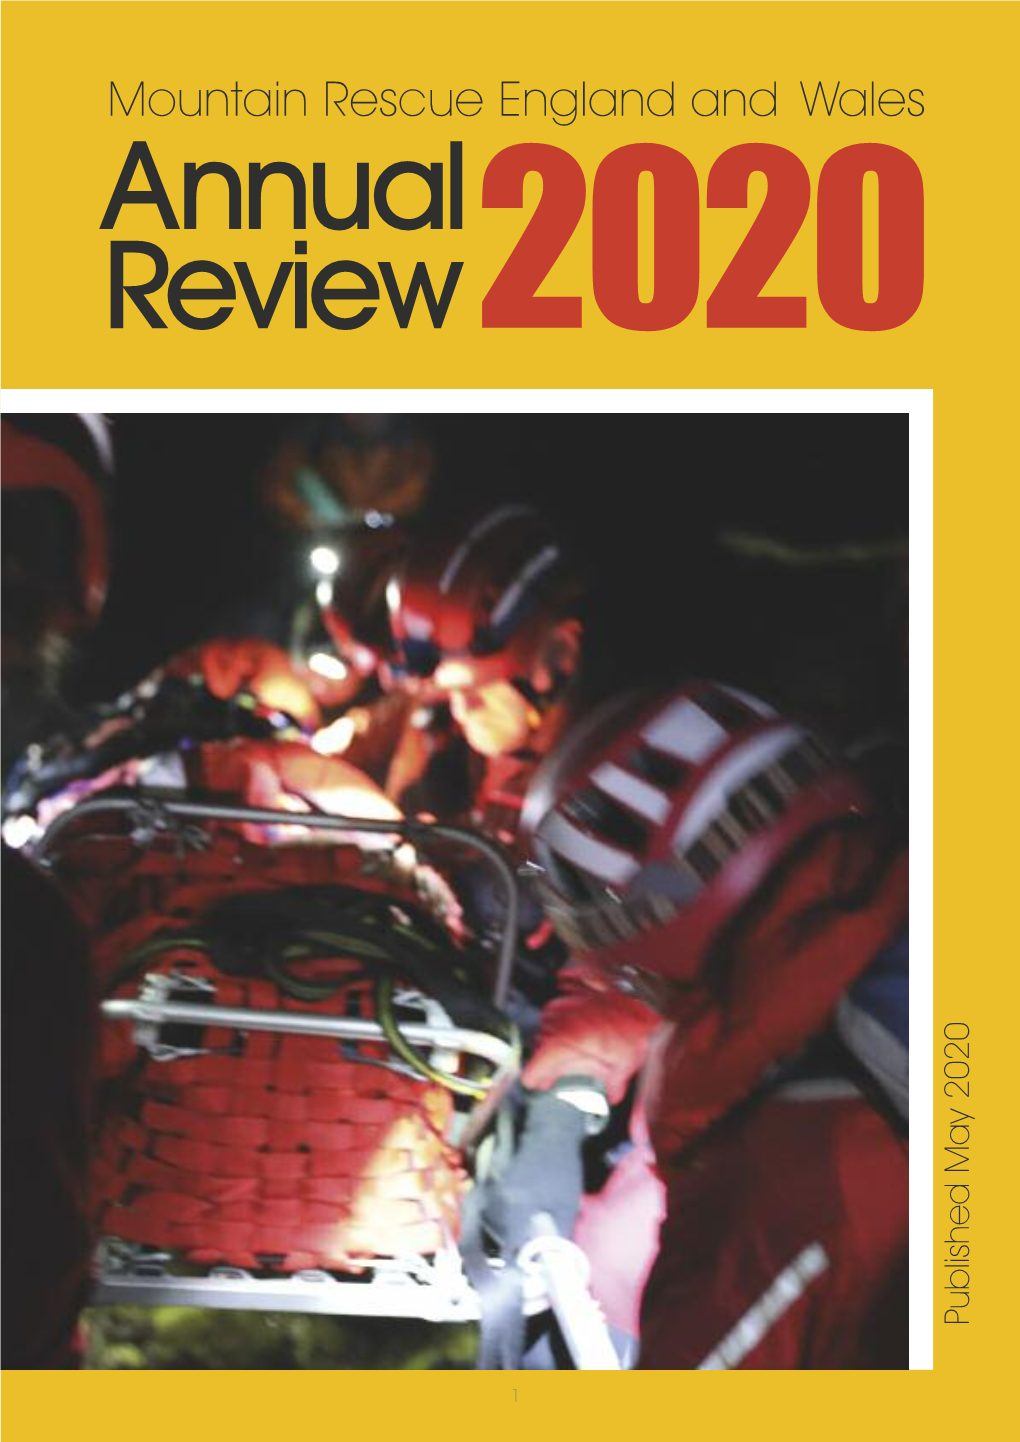 Annual Review 2020 0 2 0 2